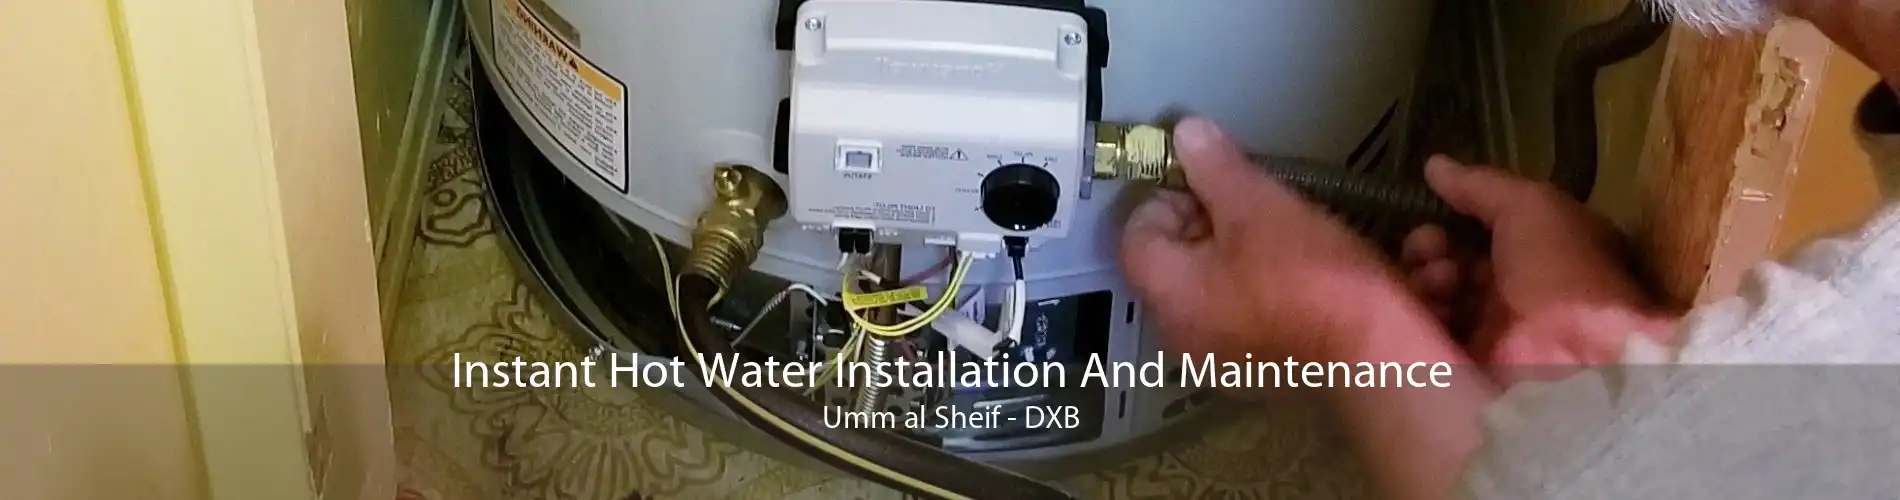 Instant Hot Water Installation And Maintenance Umm al Sheif - DXB